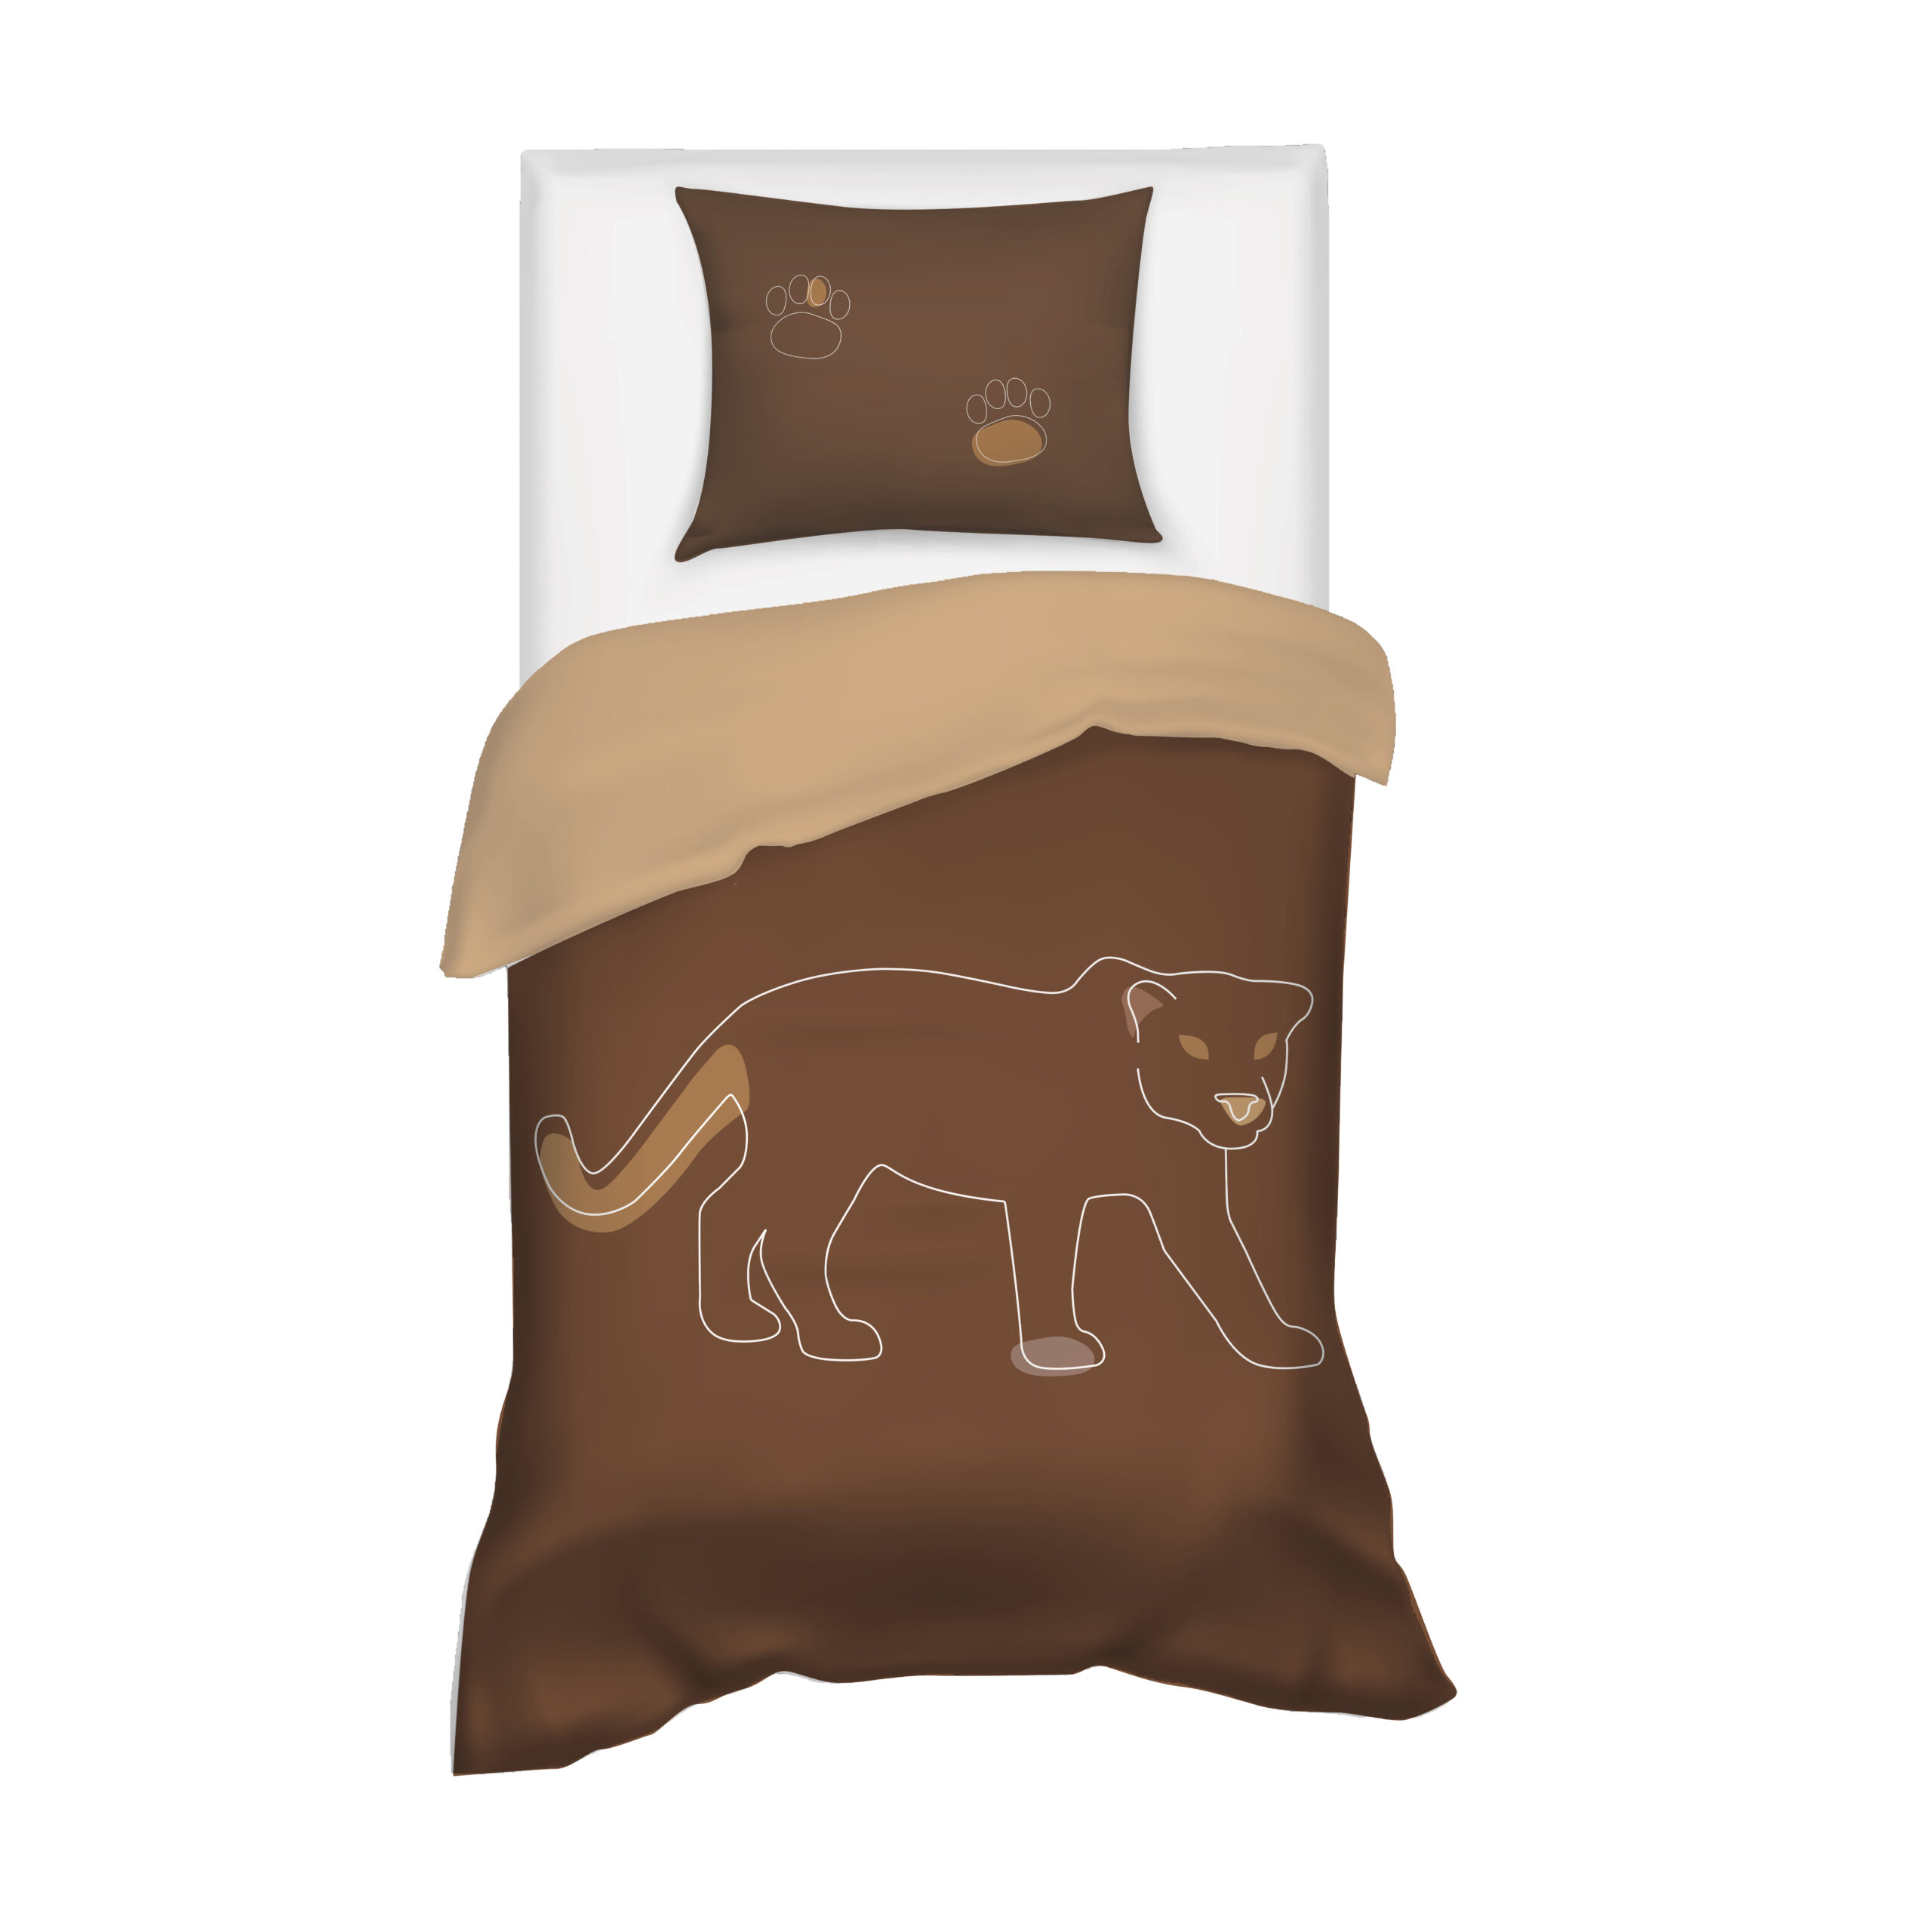 Villa Madelief 140 x 200cm Brown Panther Printed Duvet Cover with 1 Pillowcase